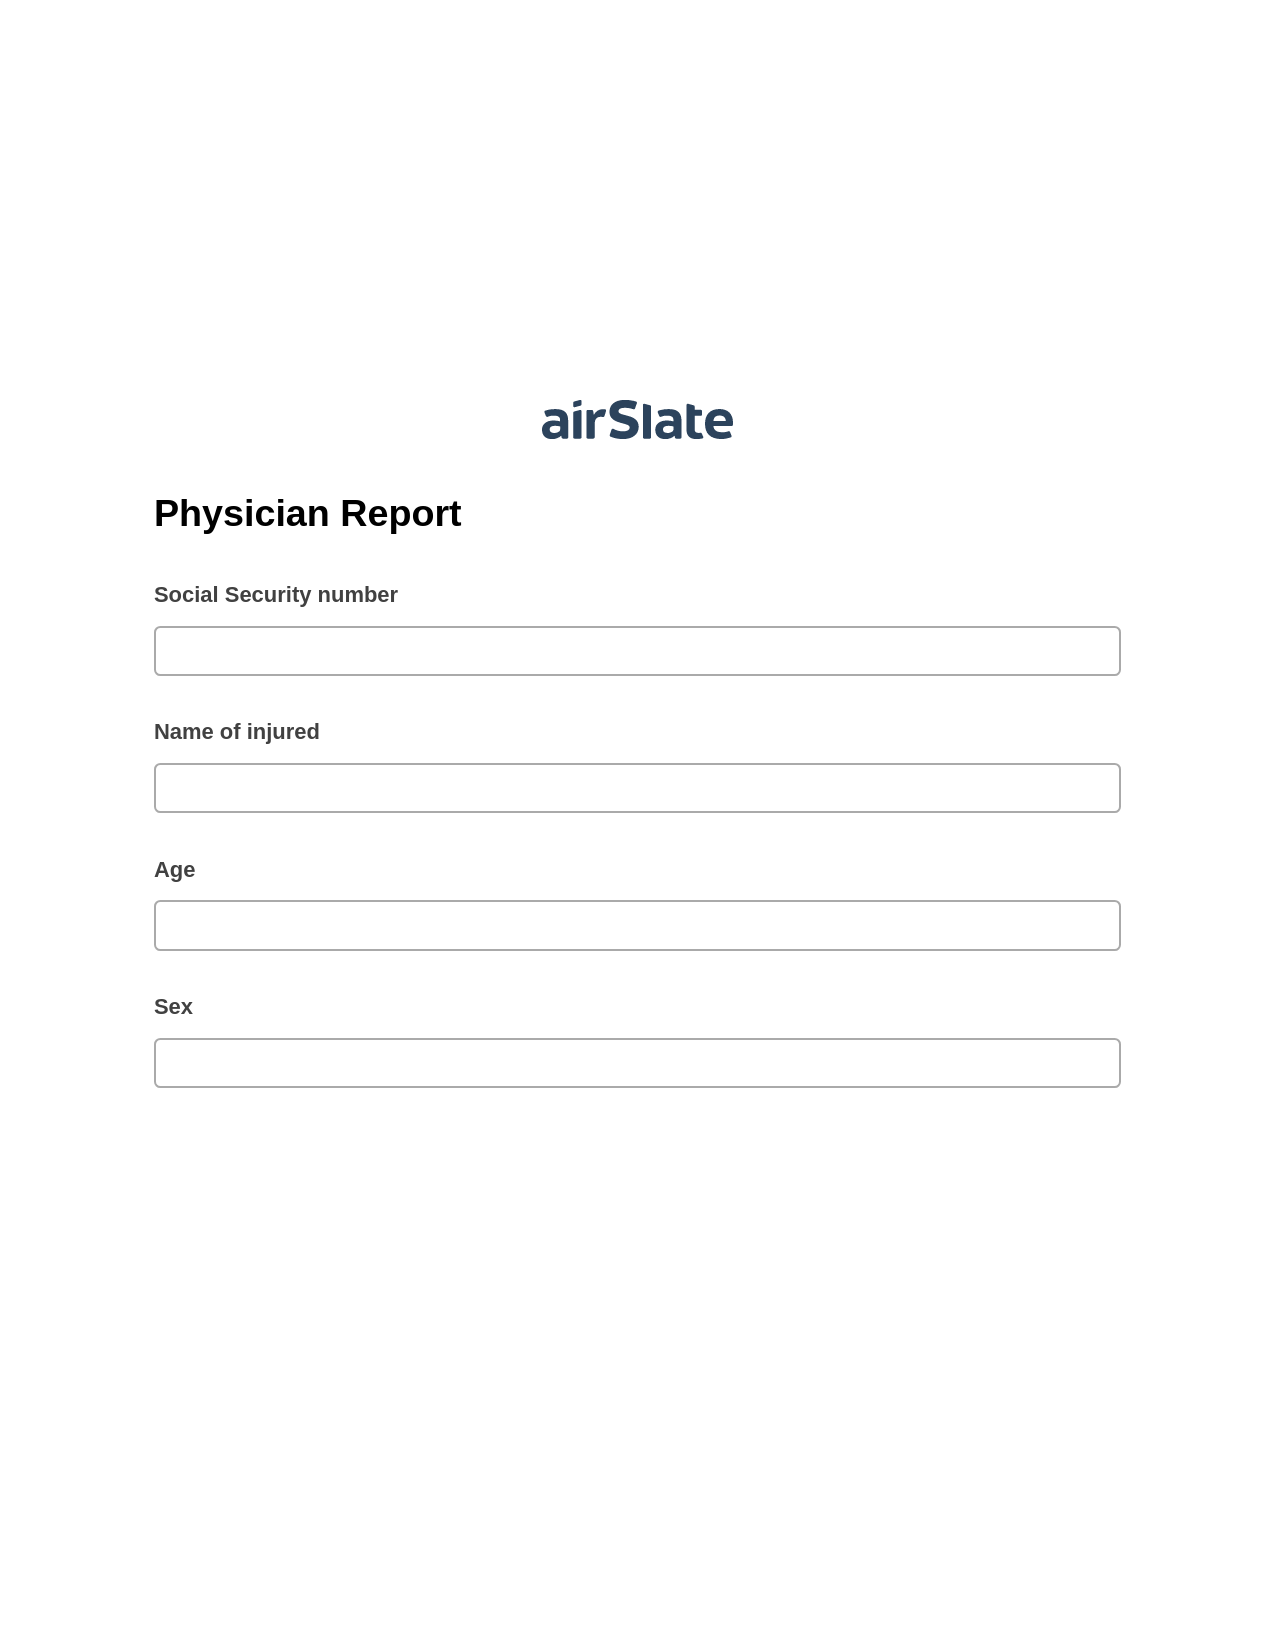 Multirole Physician Report Pre-fill from CSV File Bot, Export to MS Dynamics 365 Bot, Archive to Dropbox Bot